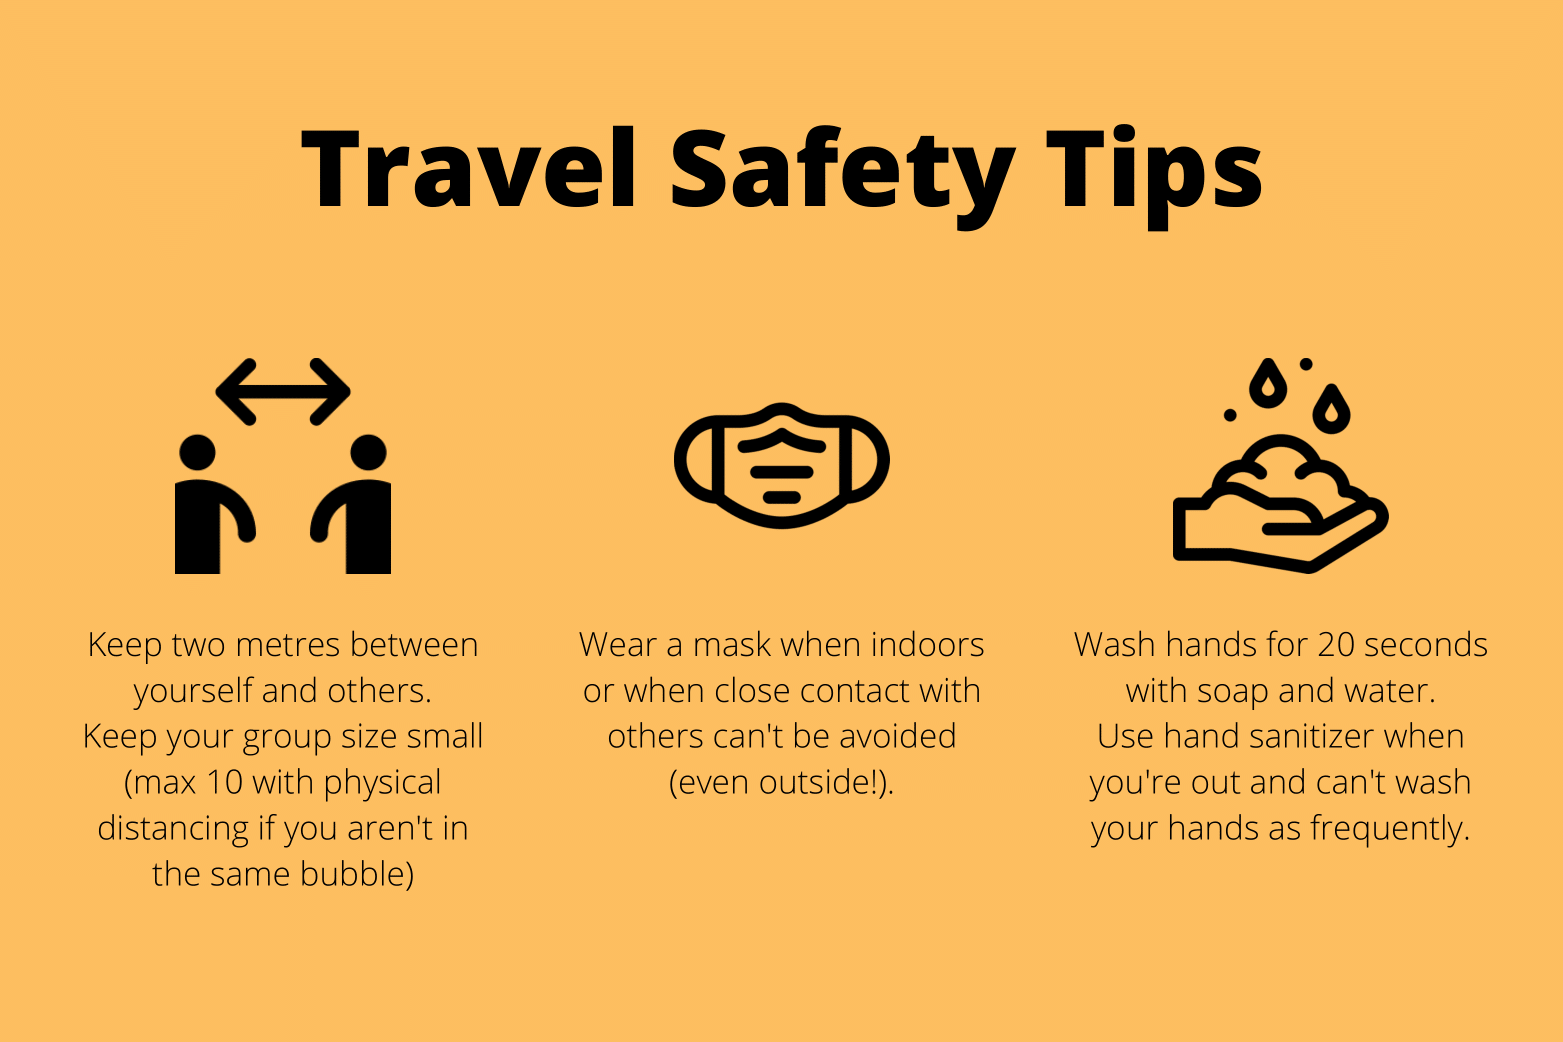 Travel Safety Tips: Keep two metres between yourself and others. Keep your group size small (max 10 with physical distancing if you aren’t in the same bubble). Wear a mask when indoors or when close contact with others can’t be avoided (even outside!). Wash hands for 20 seconds with soap and water. Use hand sanitizer when you’re out and can’t wash your hands as frequently. 